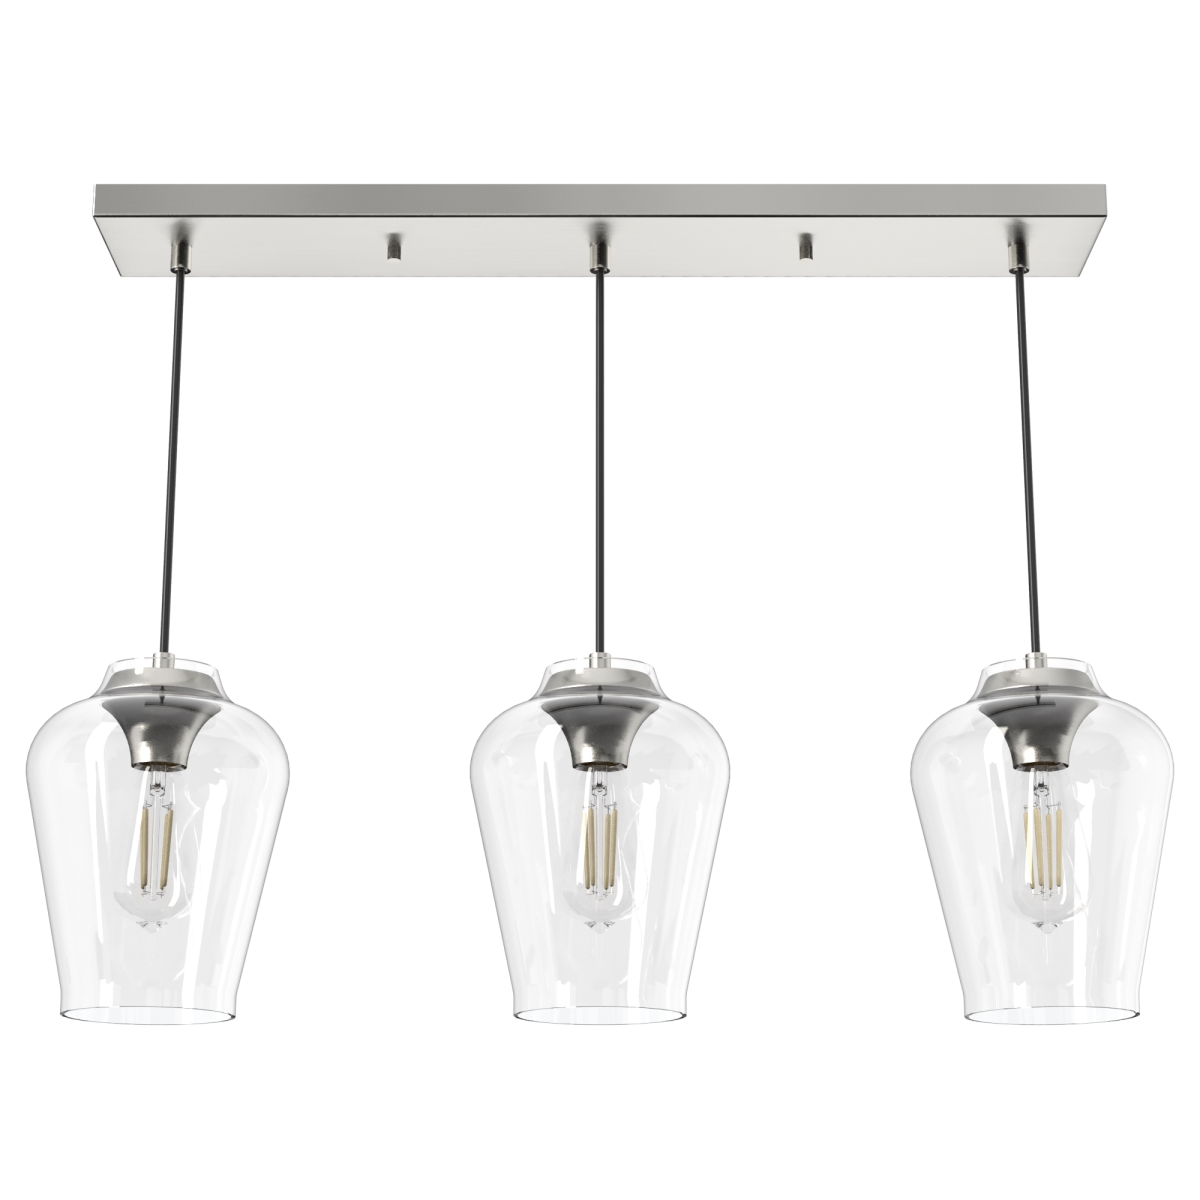 Hunter 19725 9.5 x 7.25 x 31.25 in. Vidria Brushed Nickel with Clear Glass 3 Light Pendant Cluster Ceiling Light Fixture